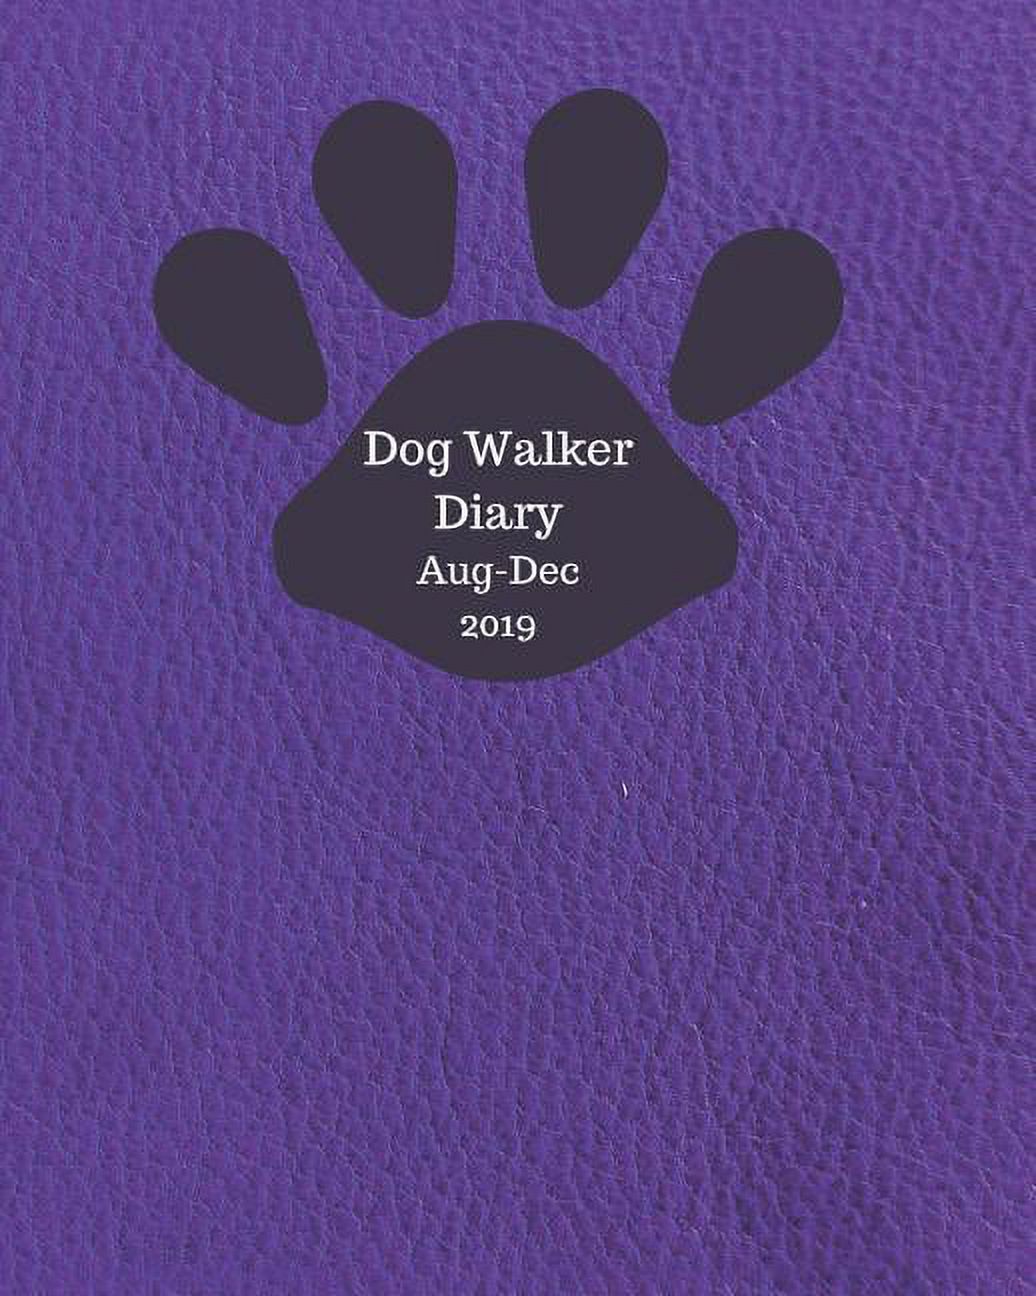 Dog Walker Diary Aug Dec 2019 : Appointment diary to record all your dog walking times & client details. Day to a page with hourly slots. Perfect for self employed pet sitters and dog walkers. Navy leather look design with black paw print (Paperback) - image 1 of 1